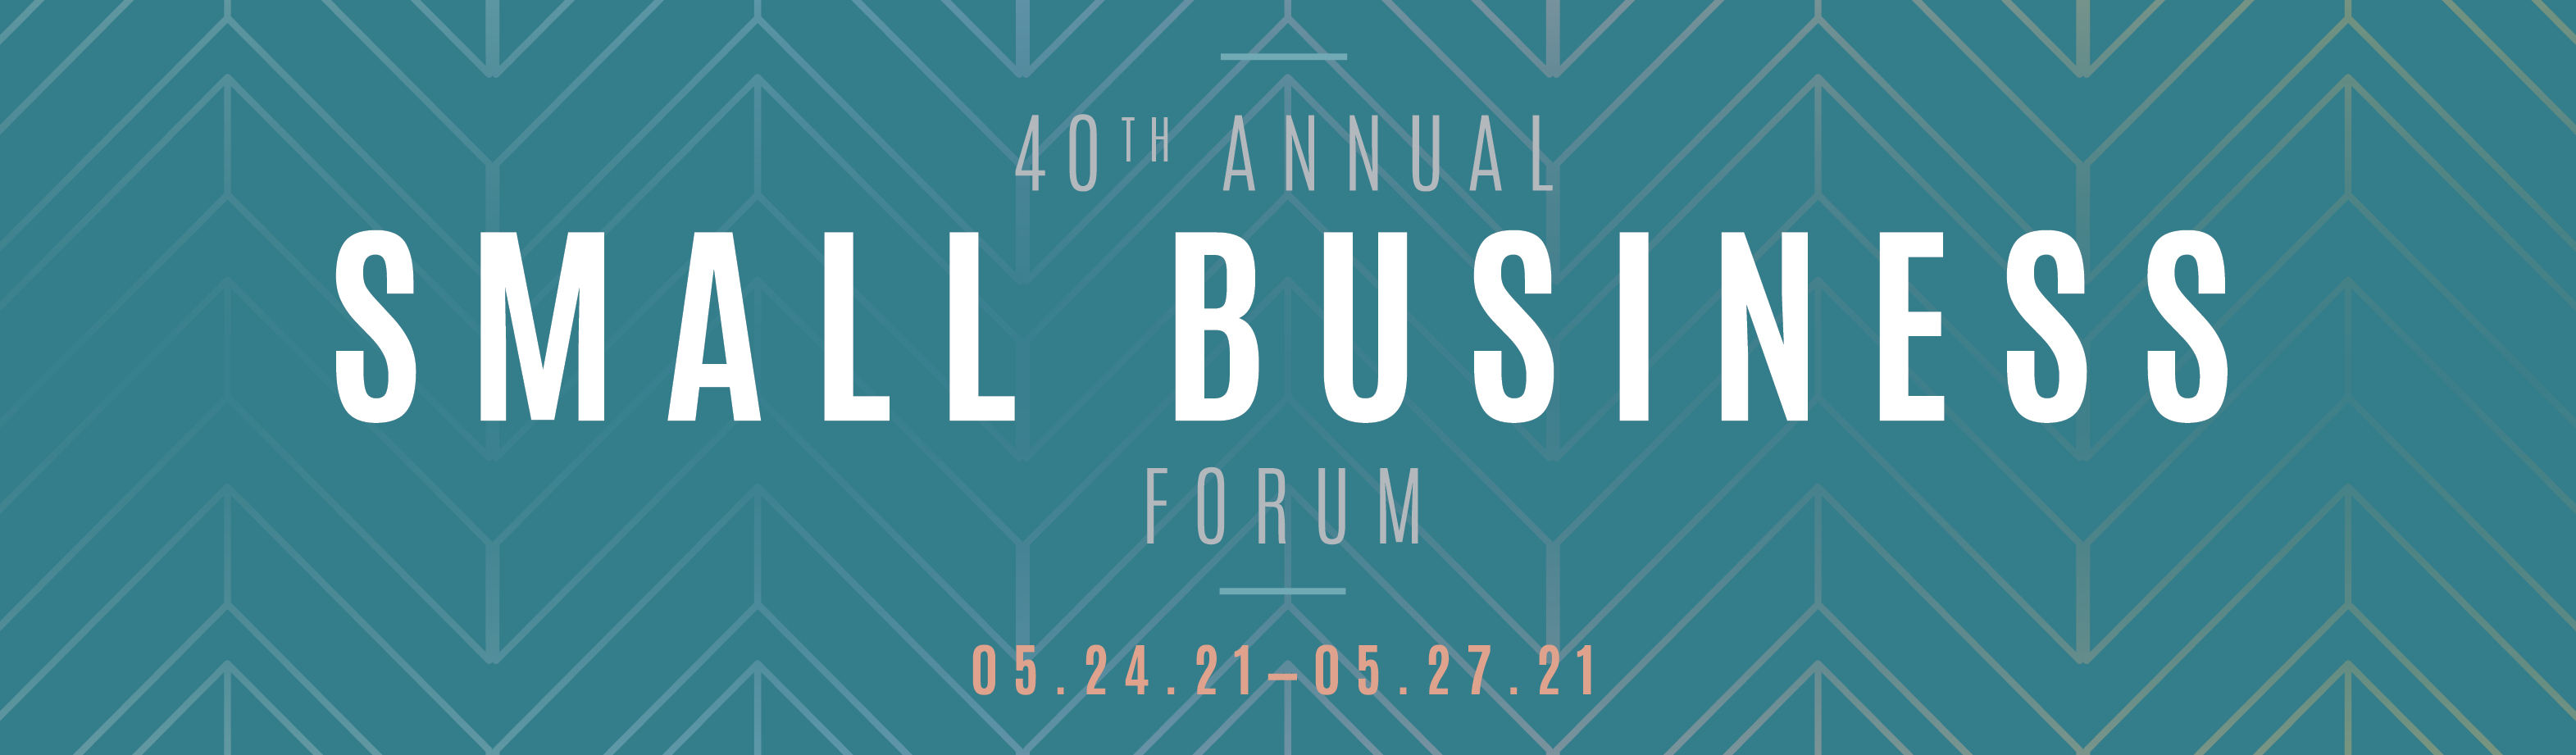 2021 small business forum report banner